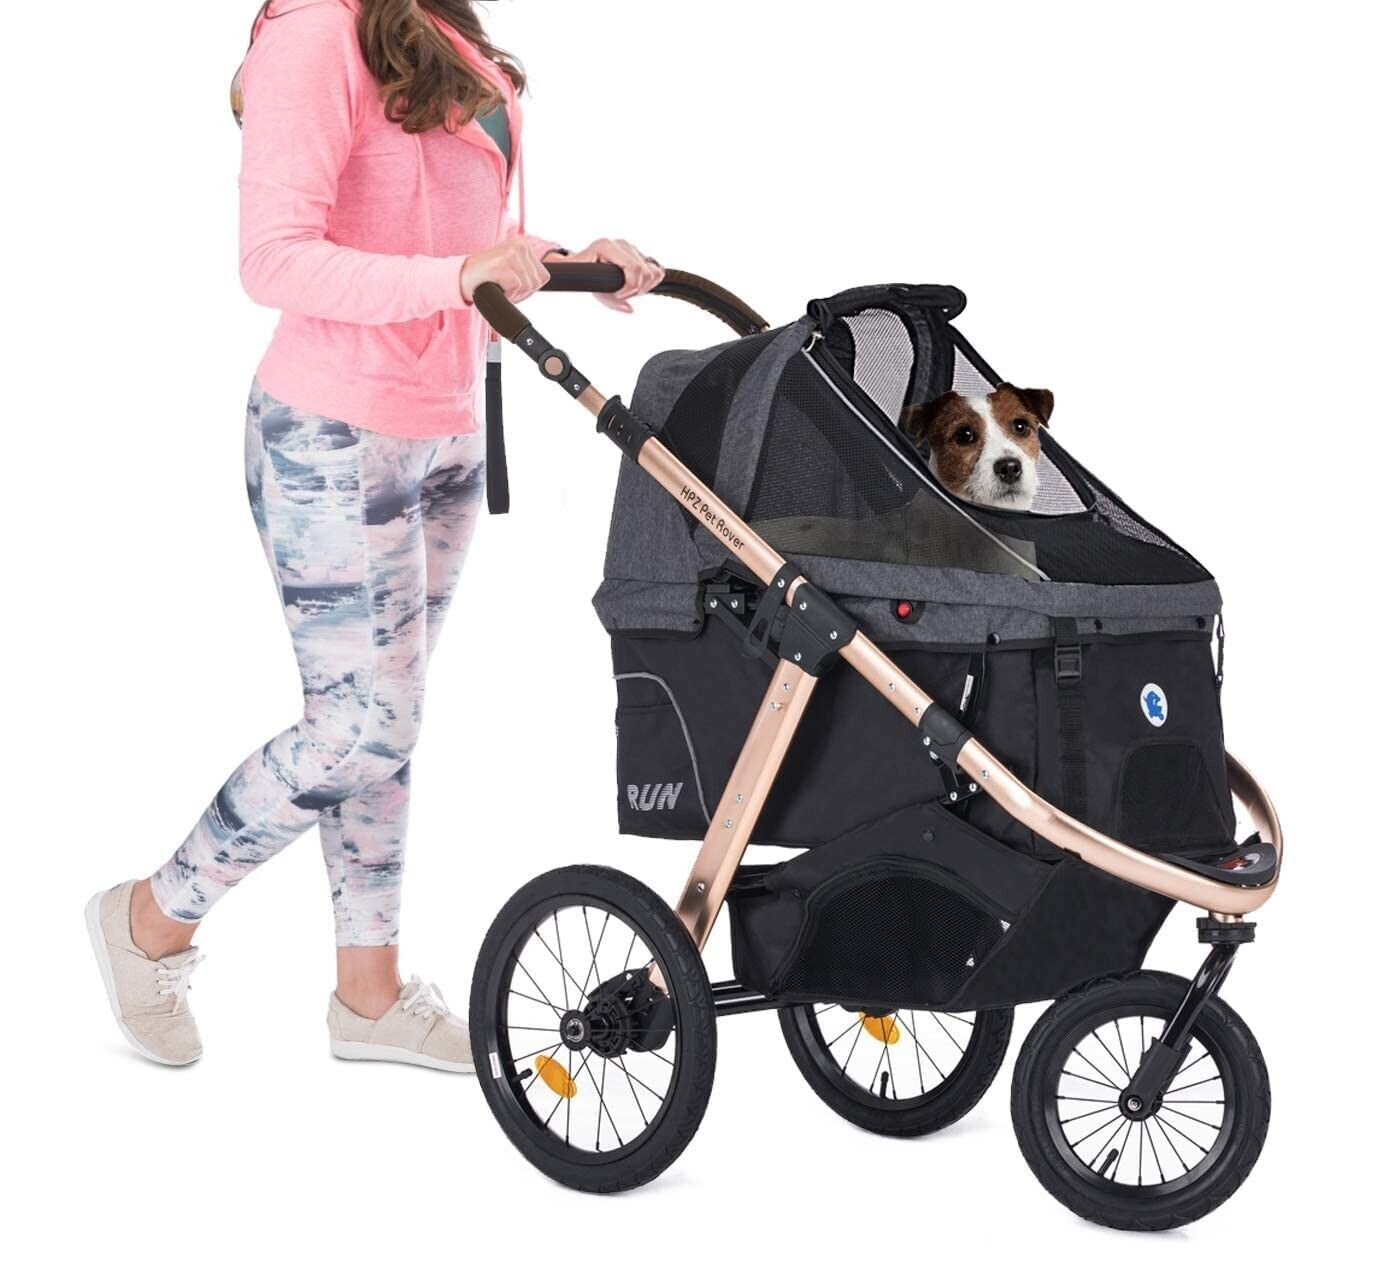 HPZ Pet Rover Run Performance Jogging Sports Stroller with Comfort Rubber Wheels